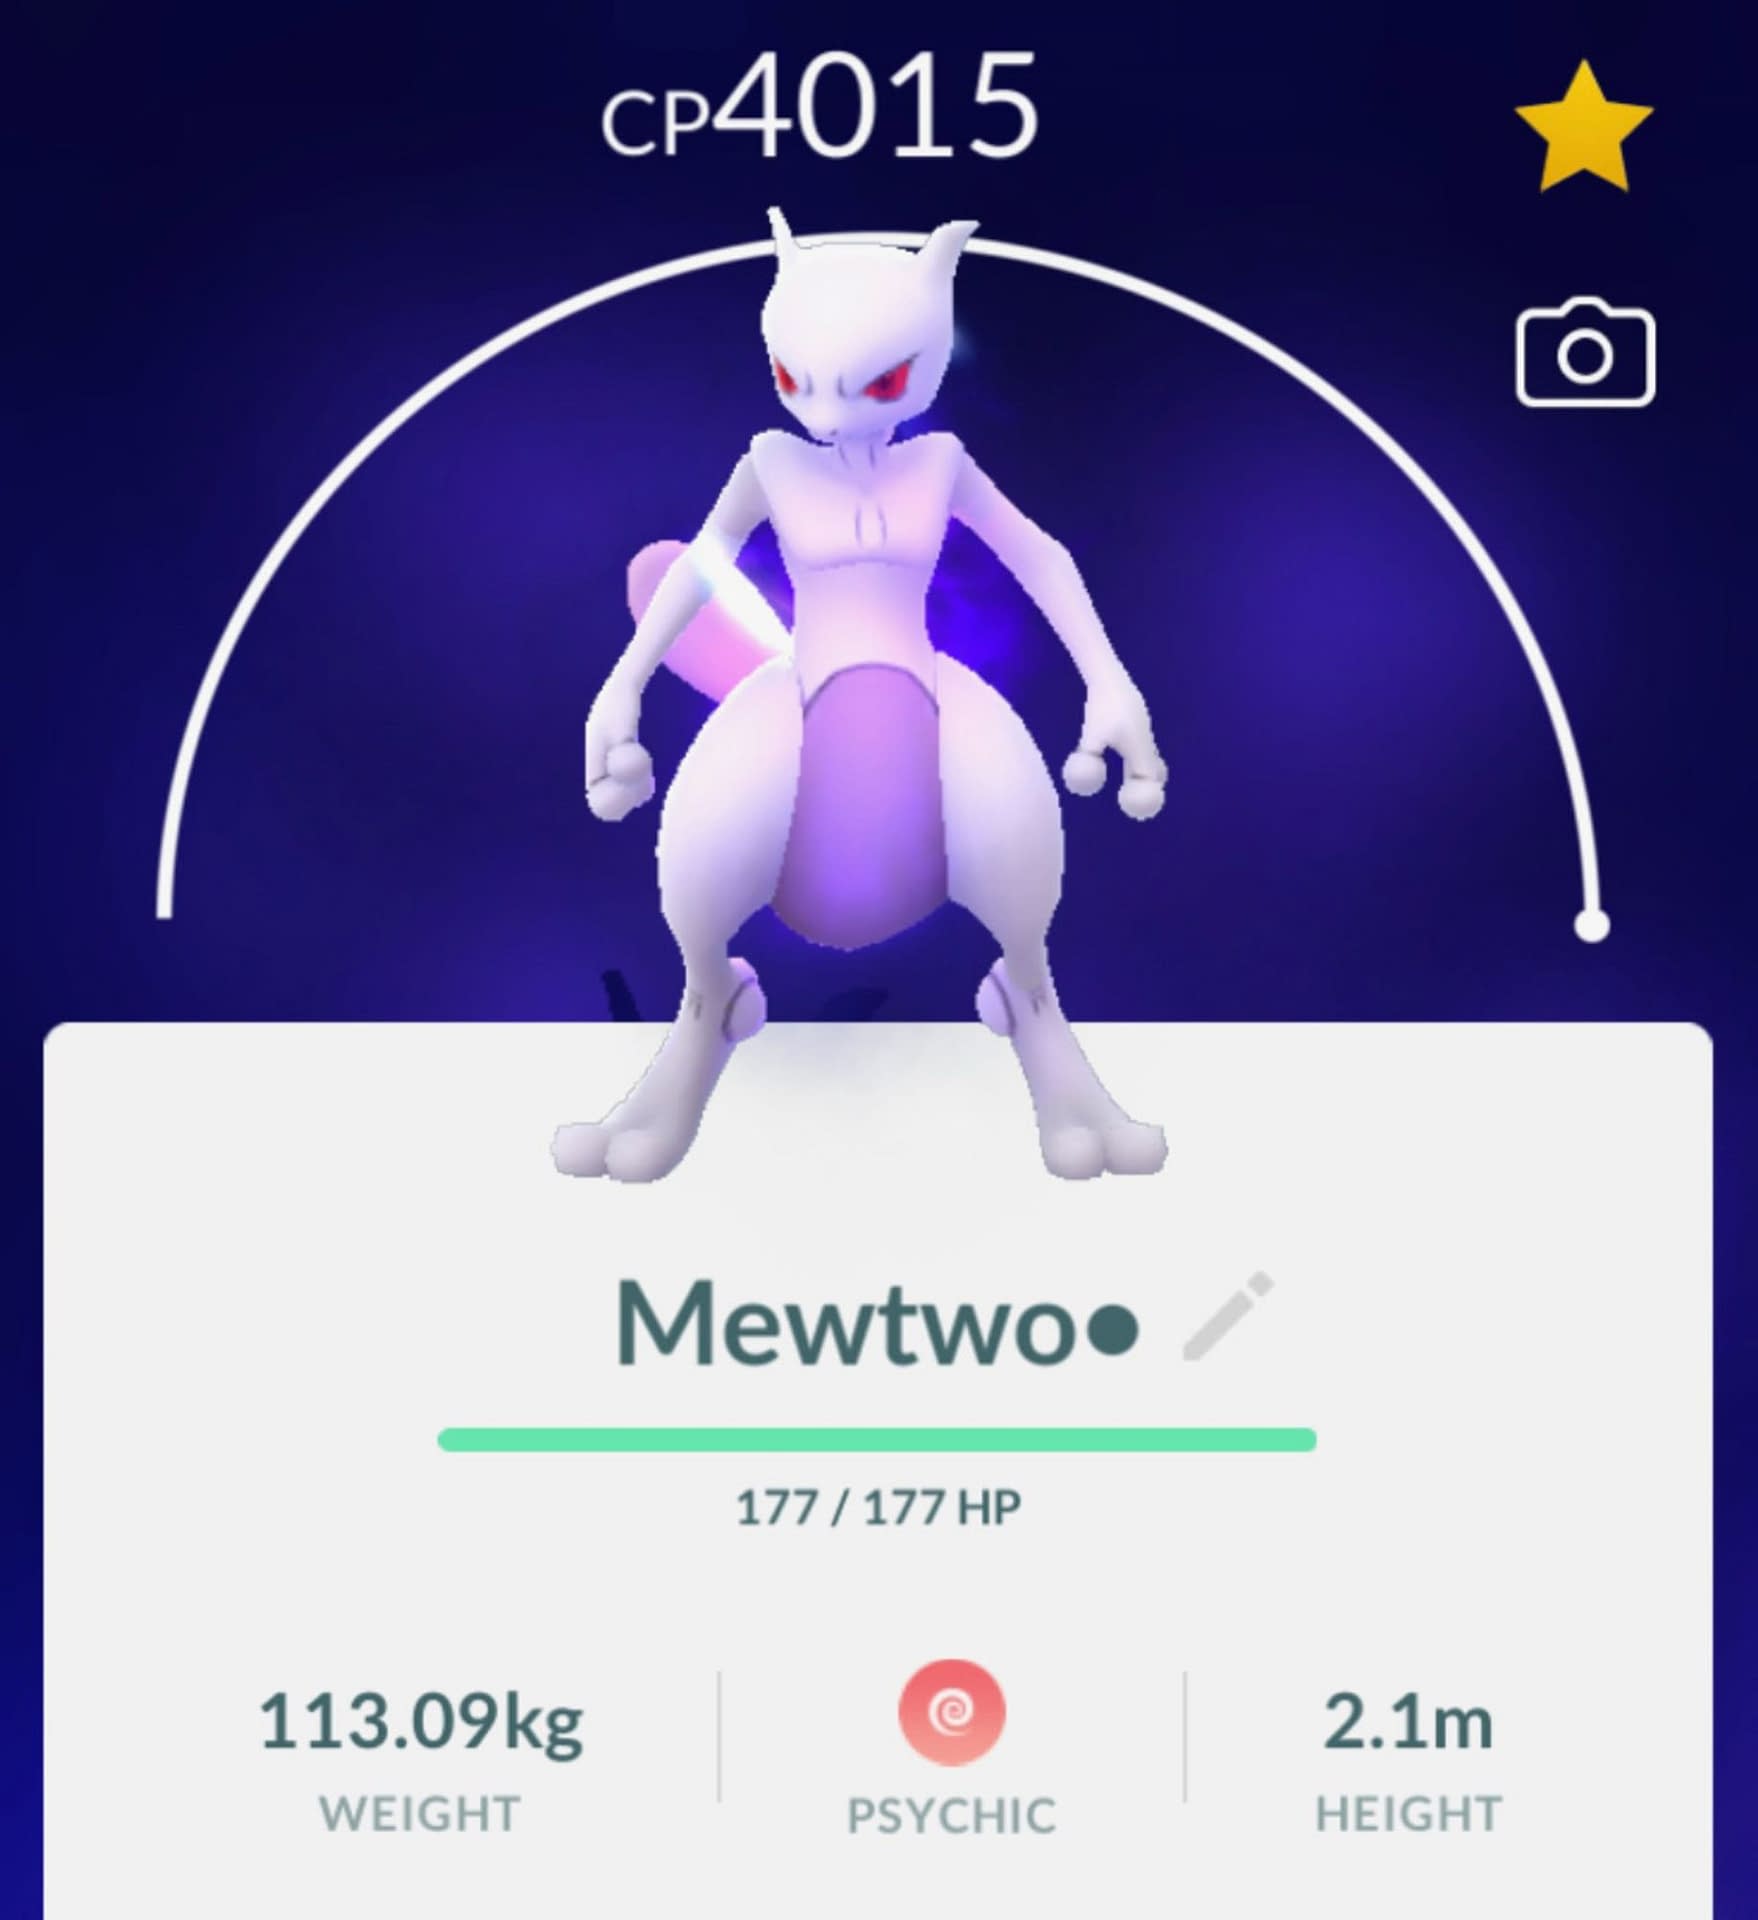 Shadow Rising - Shiny Shadow Mewtwo debut along with a new feature